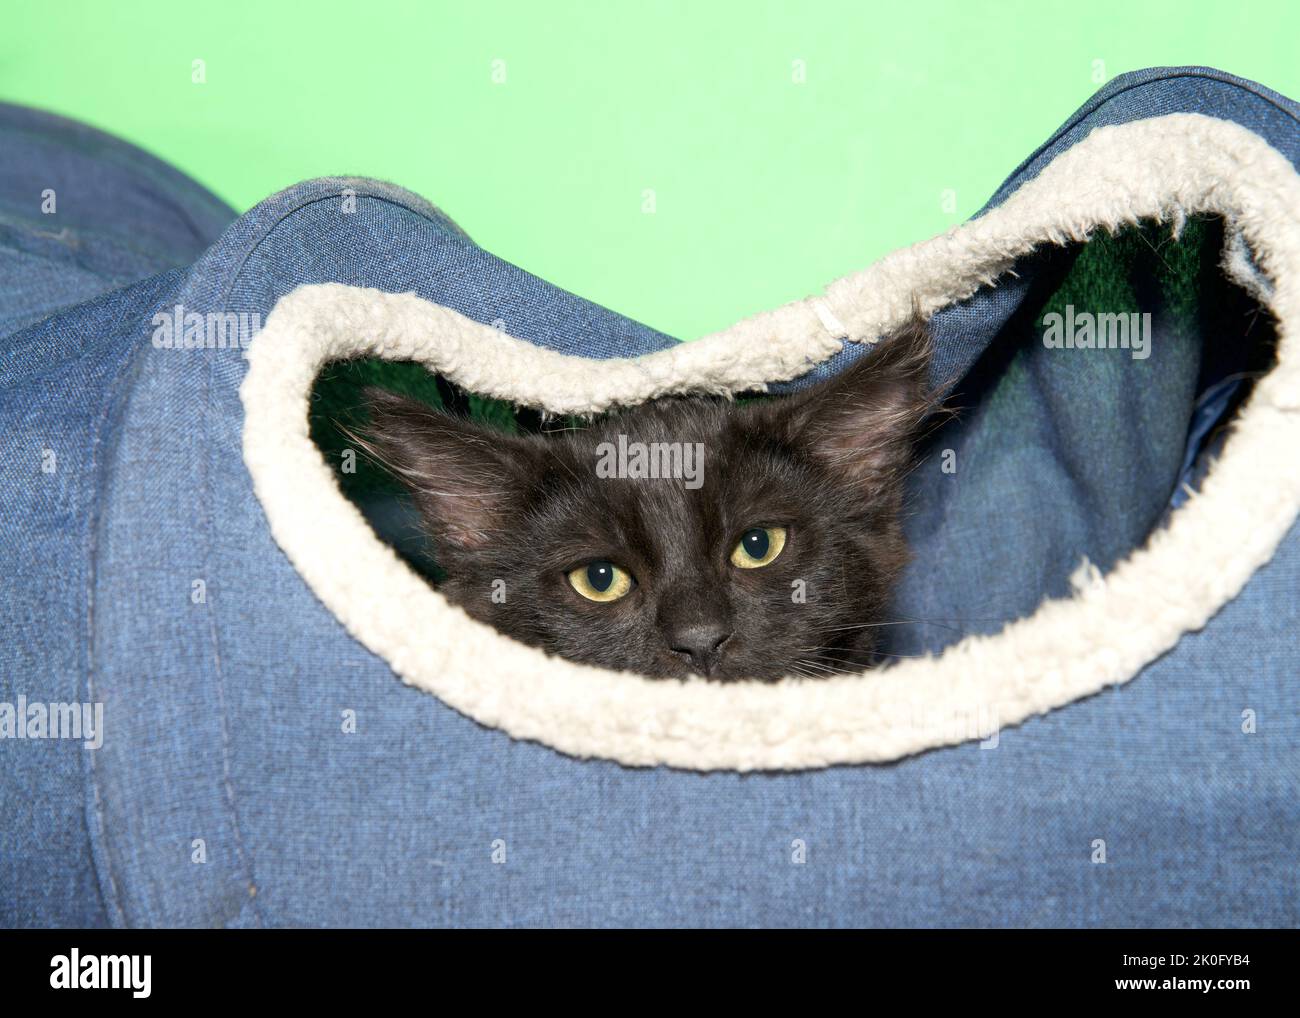 Black kitten peeking out of a denim and sheepskin play tunnel, looking carefully at viewer. Green background. Stock Photo